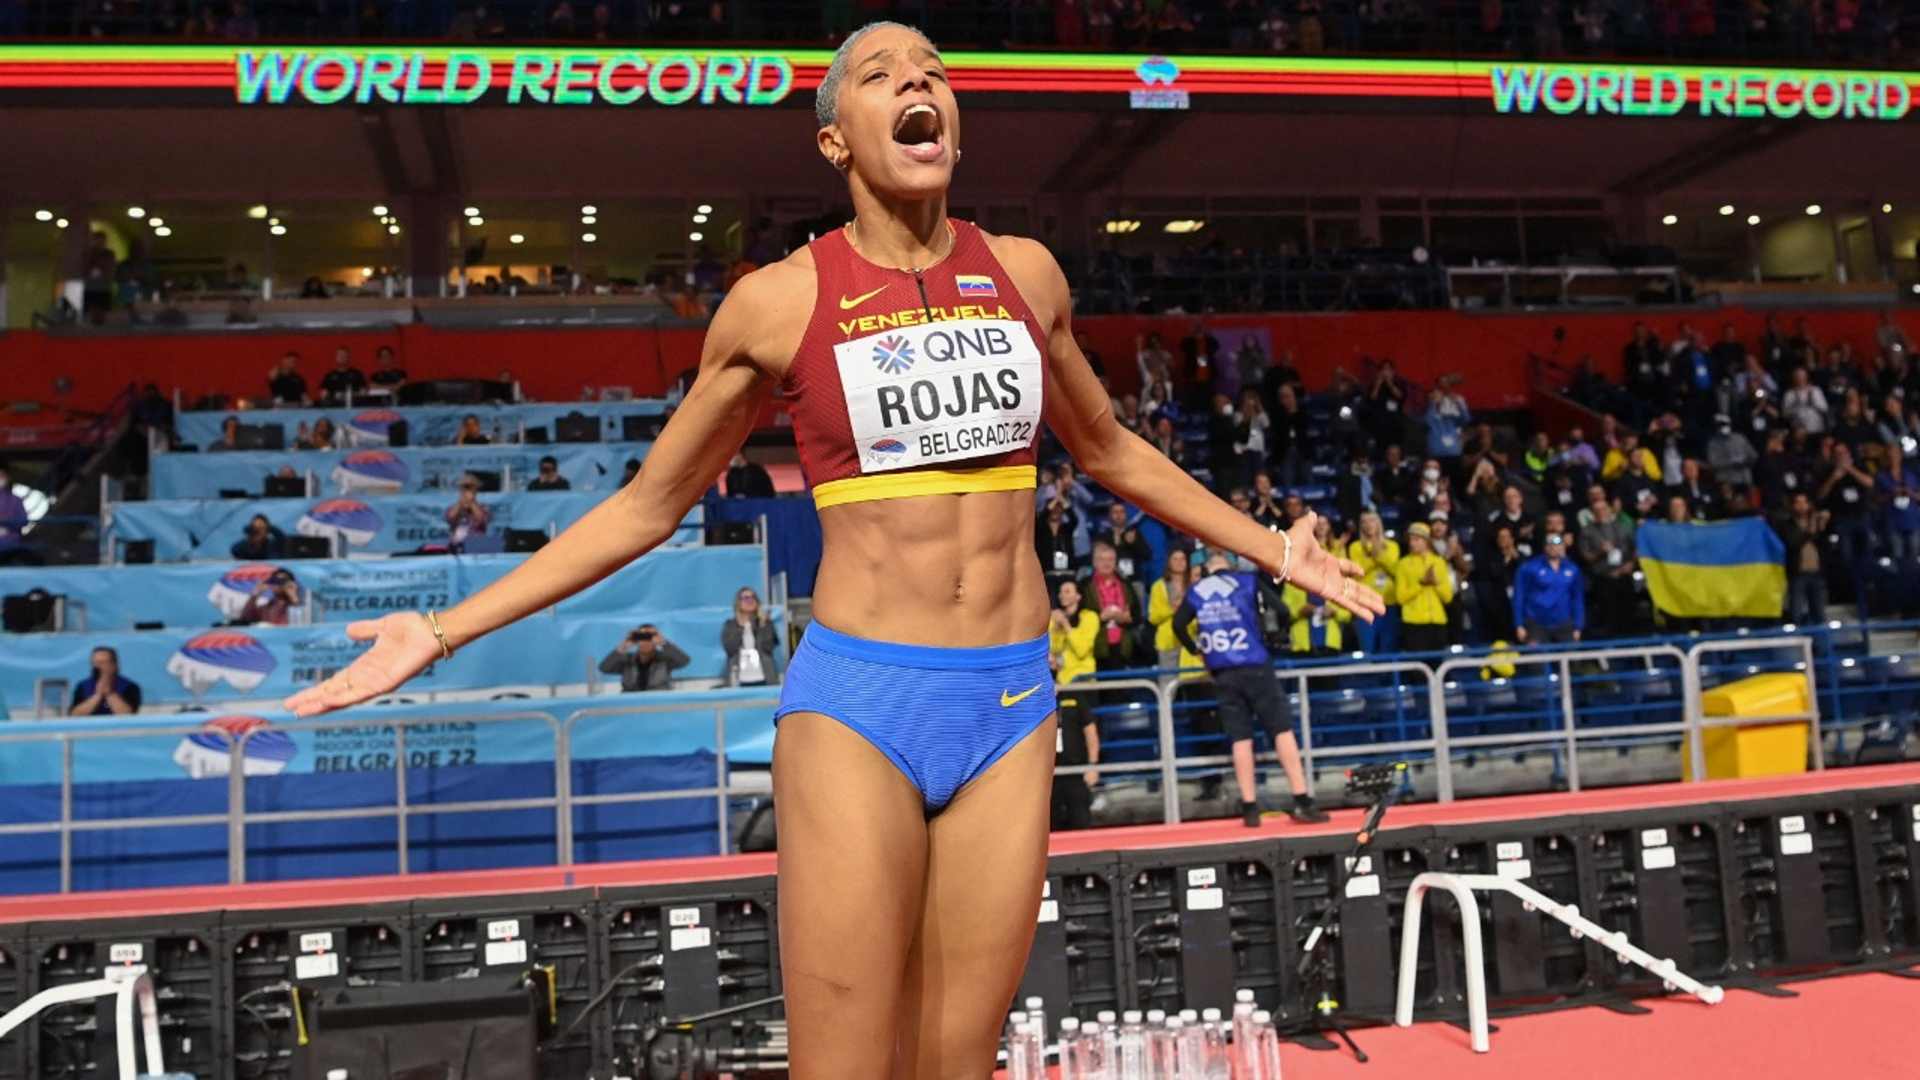 Yulimar Rojas after winning the gold medal and breaking world record in Belgrade 2022 (Image Credits - Twitter)